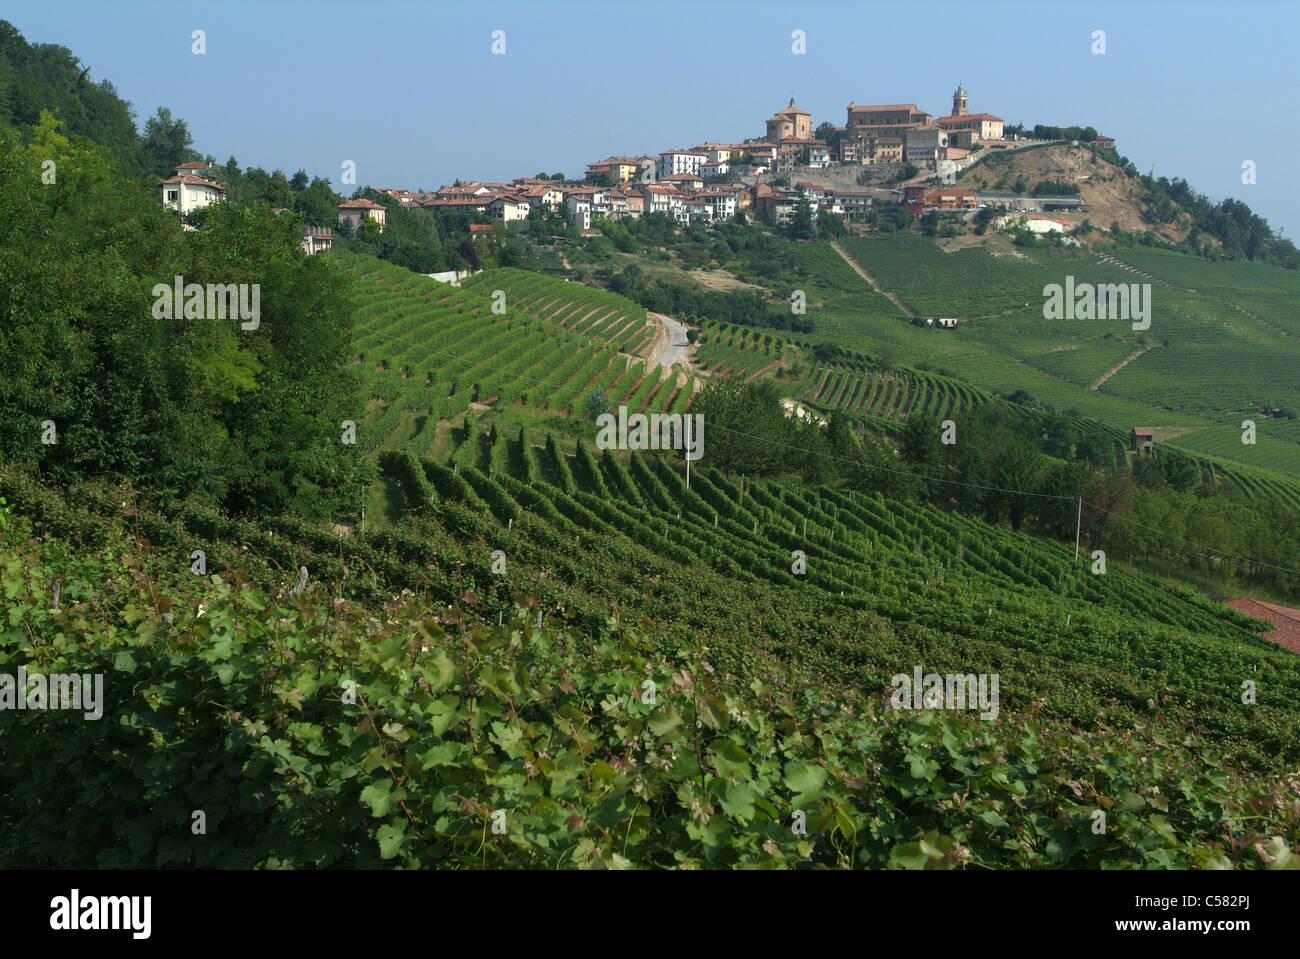 La Morra, Langhe, Piedmont, Italy, wine cultivation, wine-growing, shoots, agriculture Stock Photo